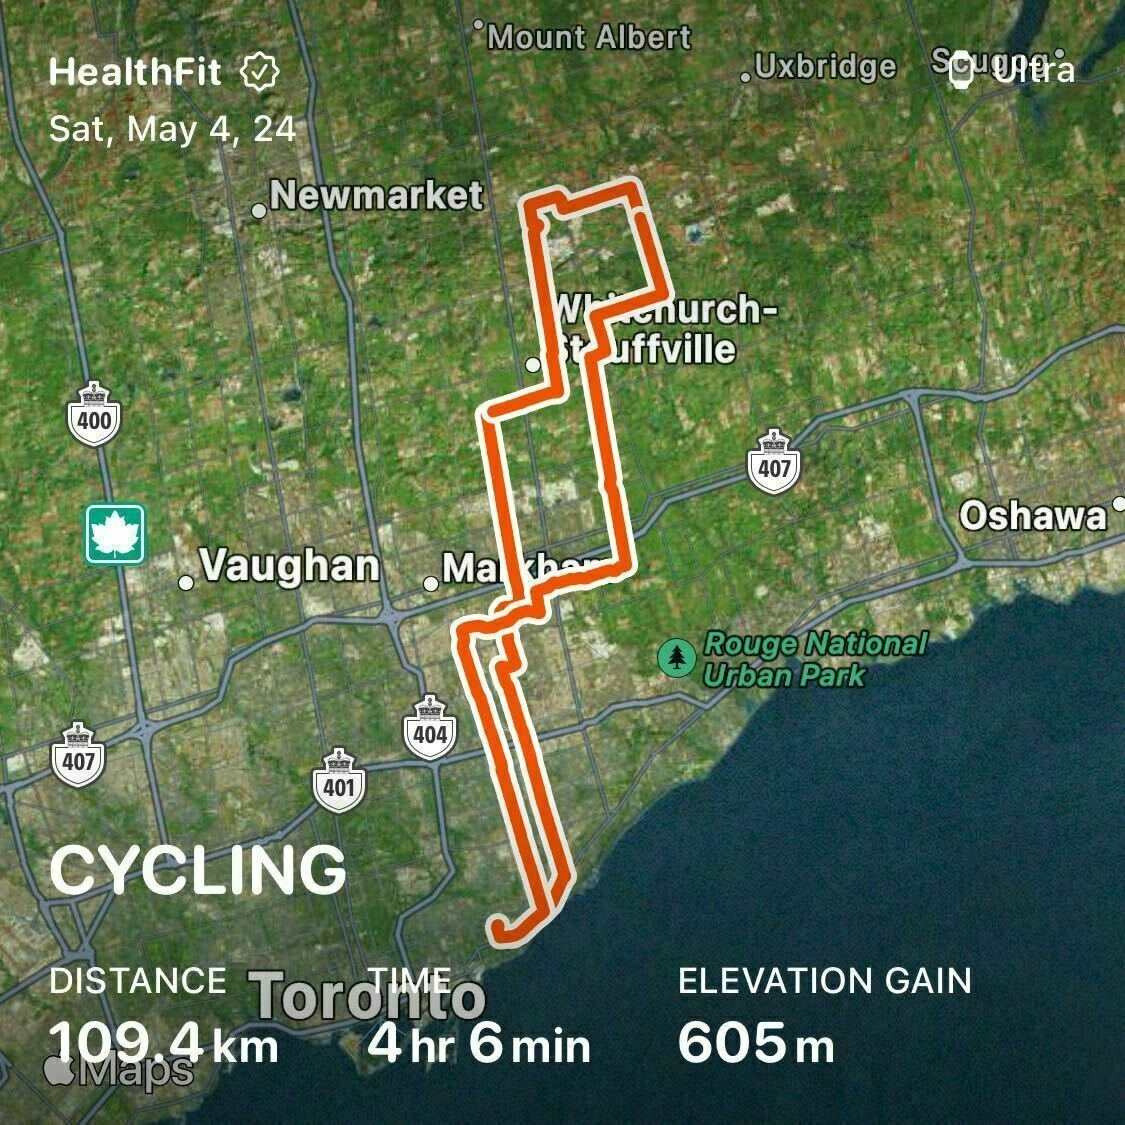 Auto-generated description: A GPS-tracked map showcases a 109.4 km cycling route completed in 4 hours and 6 minutes with an elevation gain of 605 meters, passing through areas near Vaughan, Newmarket, and close to Rouge National Urban Park.